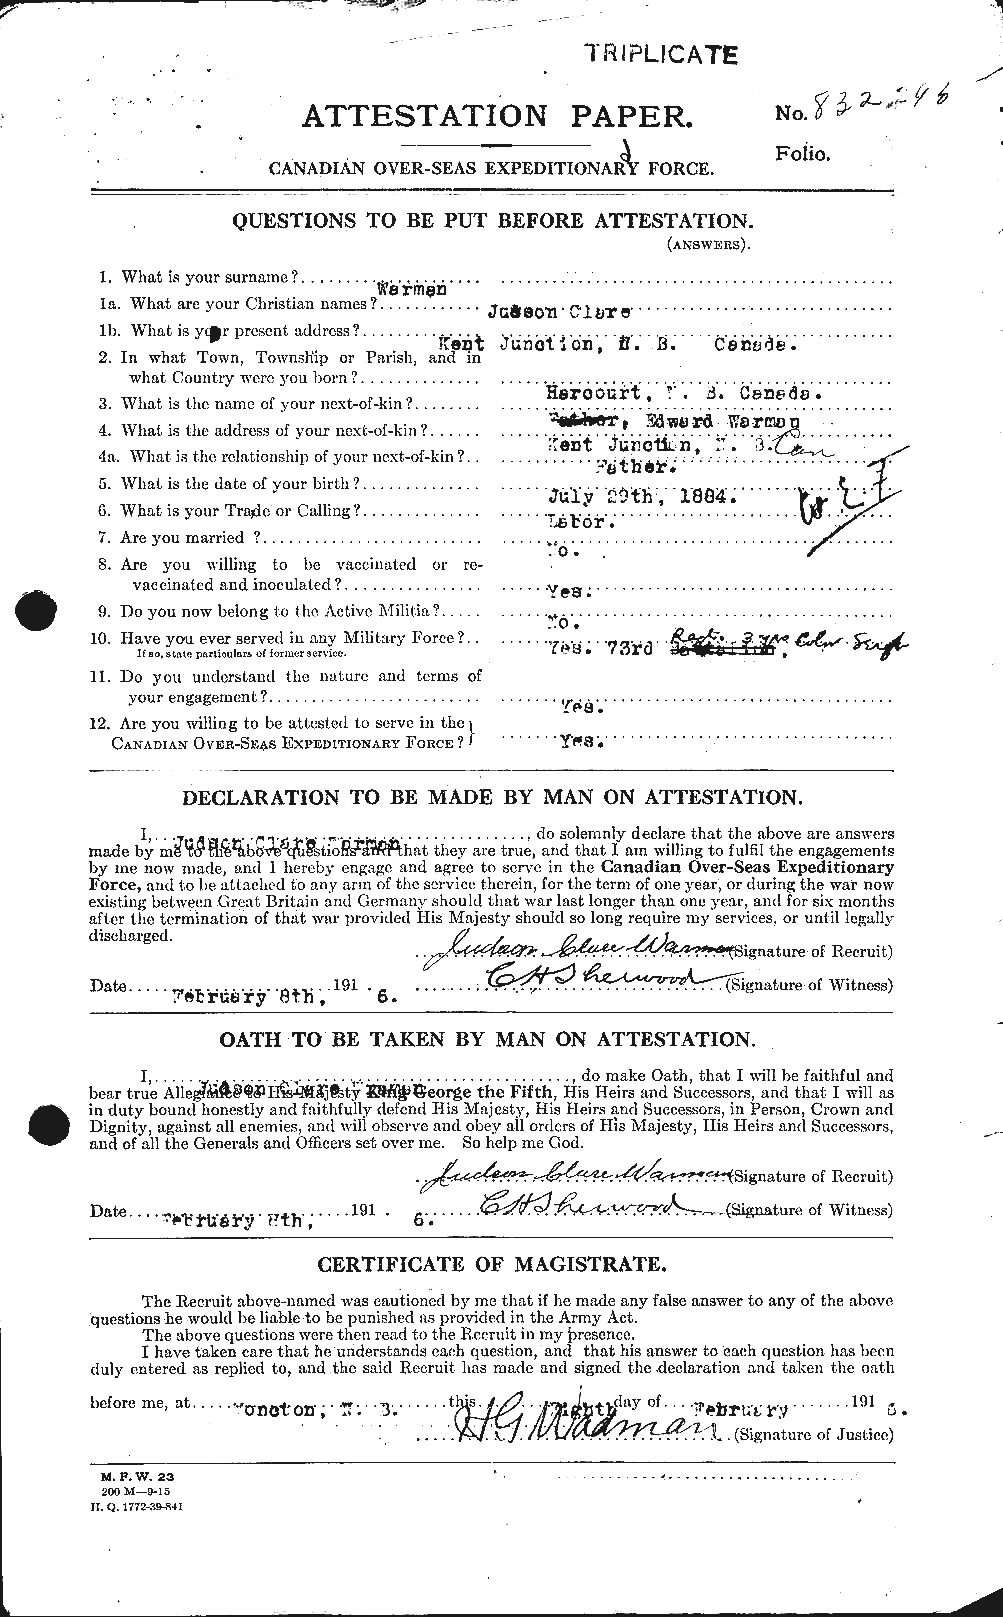 Personnel Records of the First World War - CEF 657230a